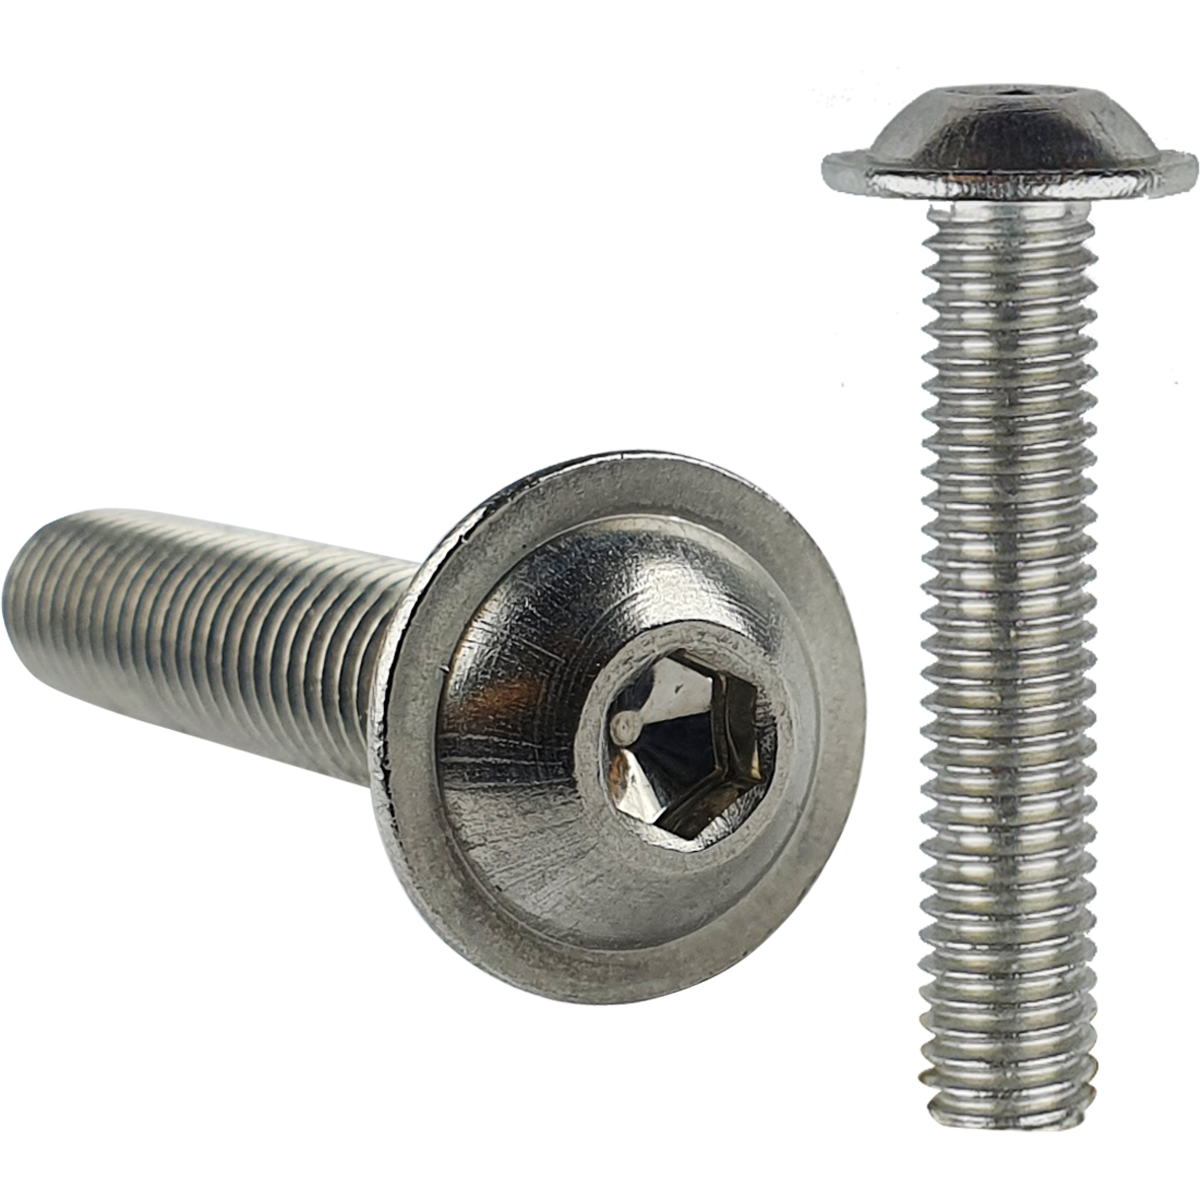 Button head machine screw with hex socket recess and flange. Available in numerous materials and sizes.